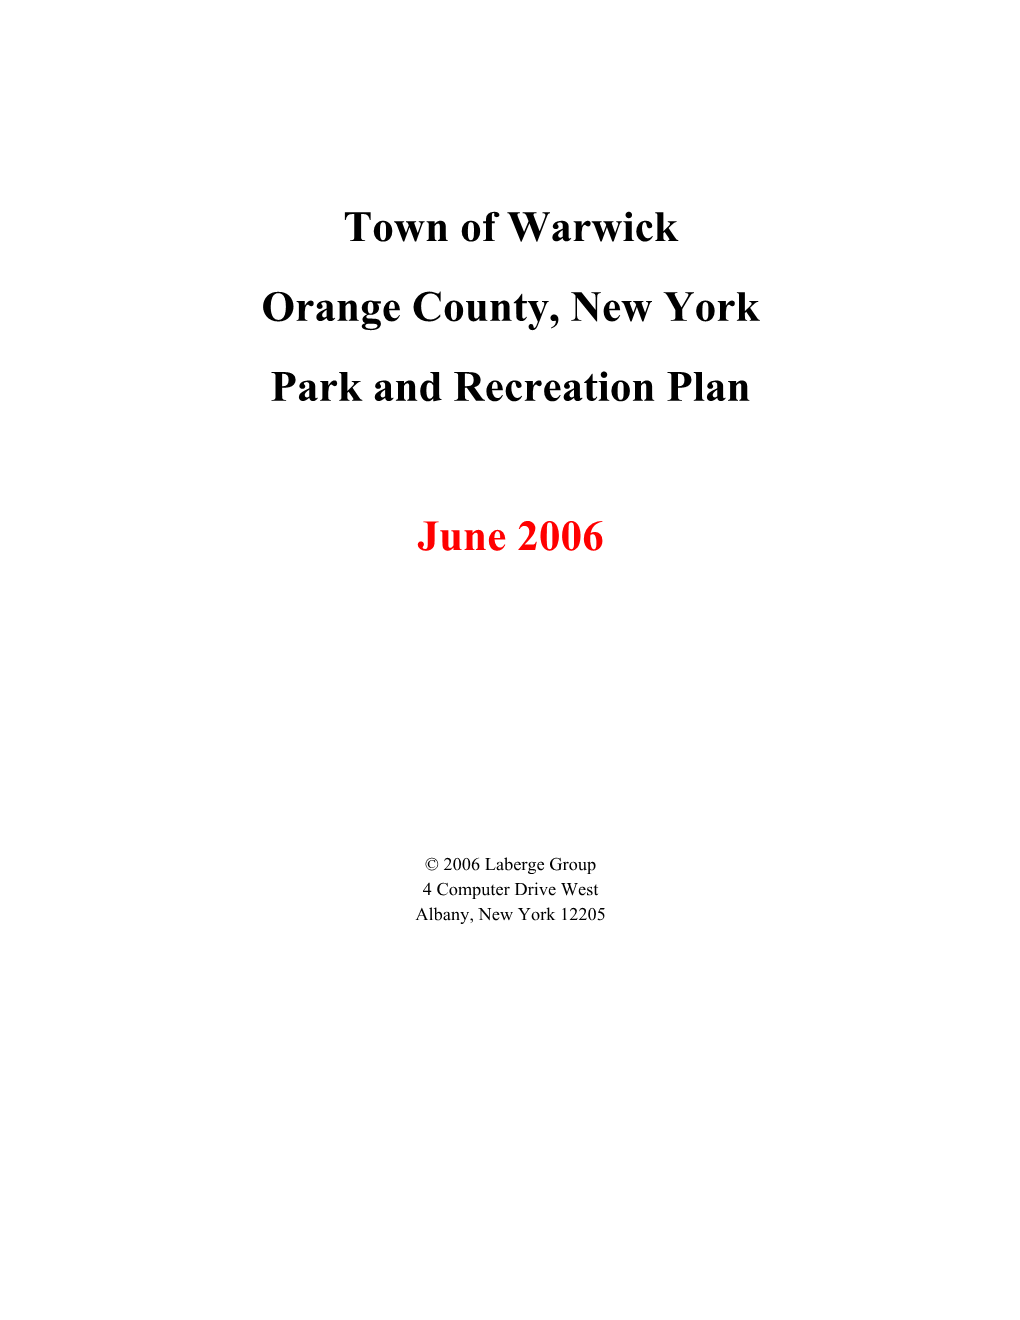 Town of Warwick Orange County, New York Park and Recreation Plan